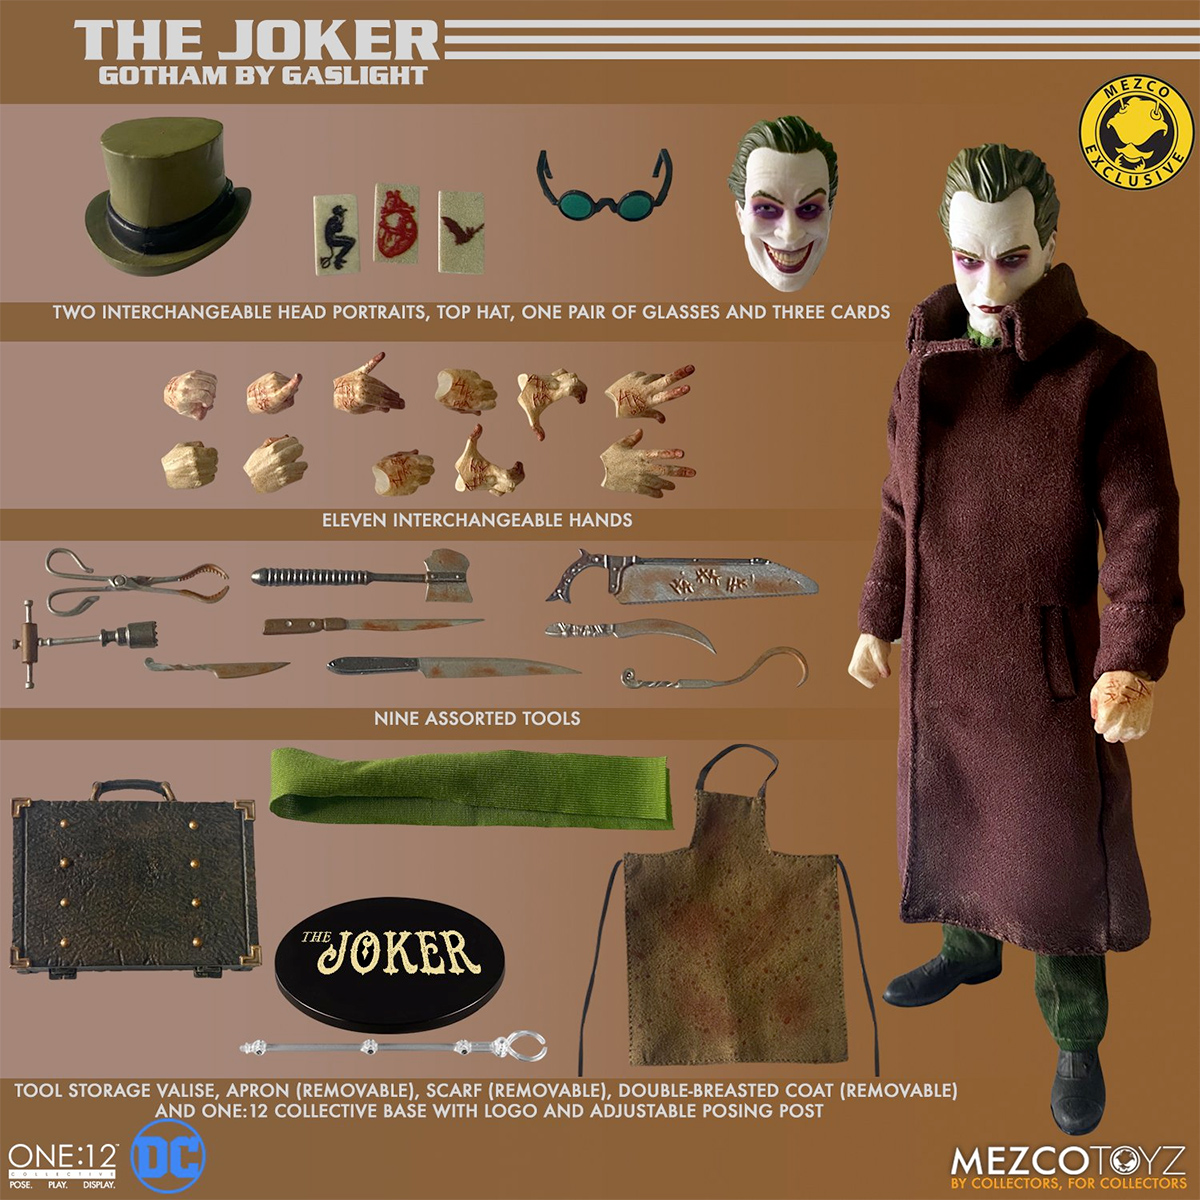 The Joker: Gotham by Gaslight One:12 Collective Action Figure